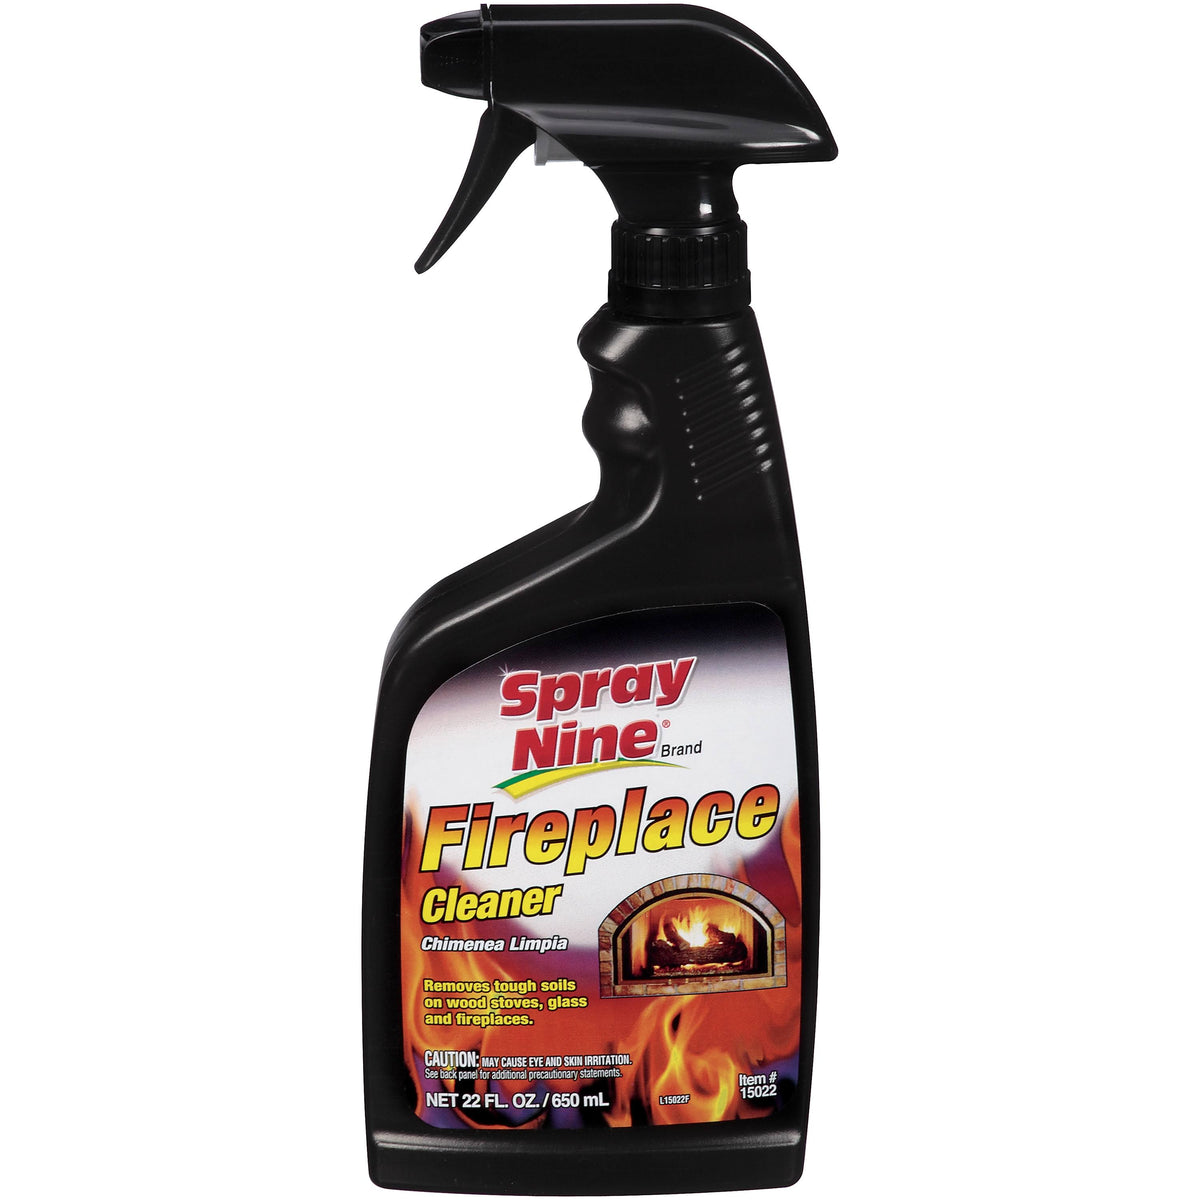 Buy spray nine fireplace cleaner - Online store for fireplace & accessories, chimney brush & cleaning systems in USA, on sale, low price, discount deals, coupon code